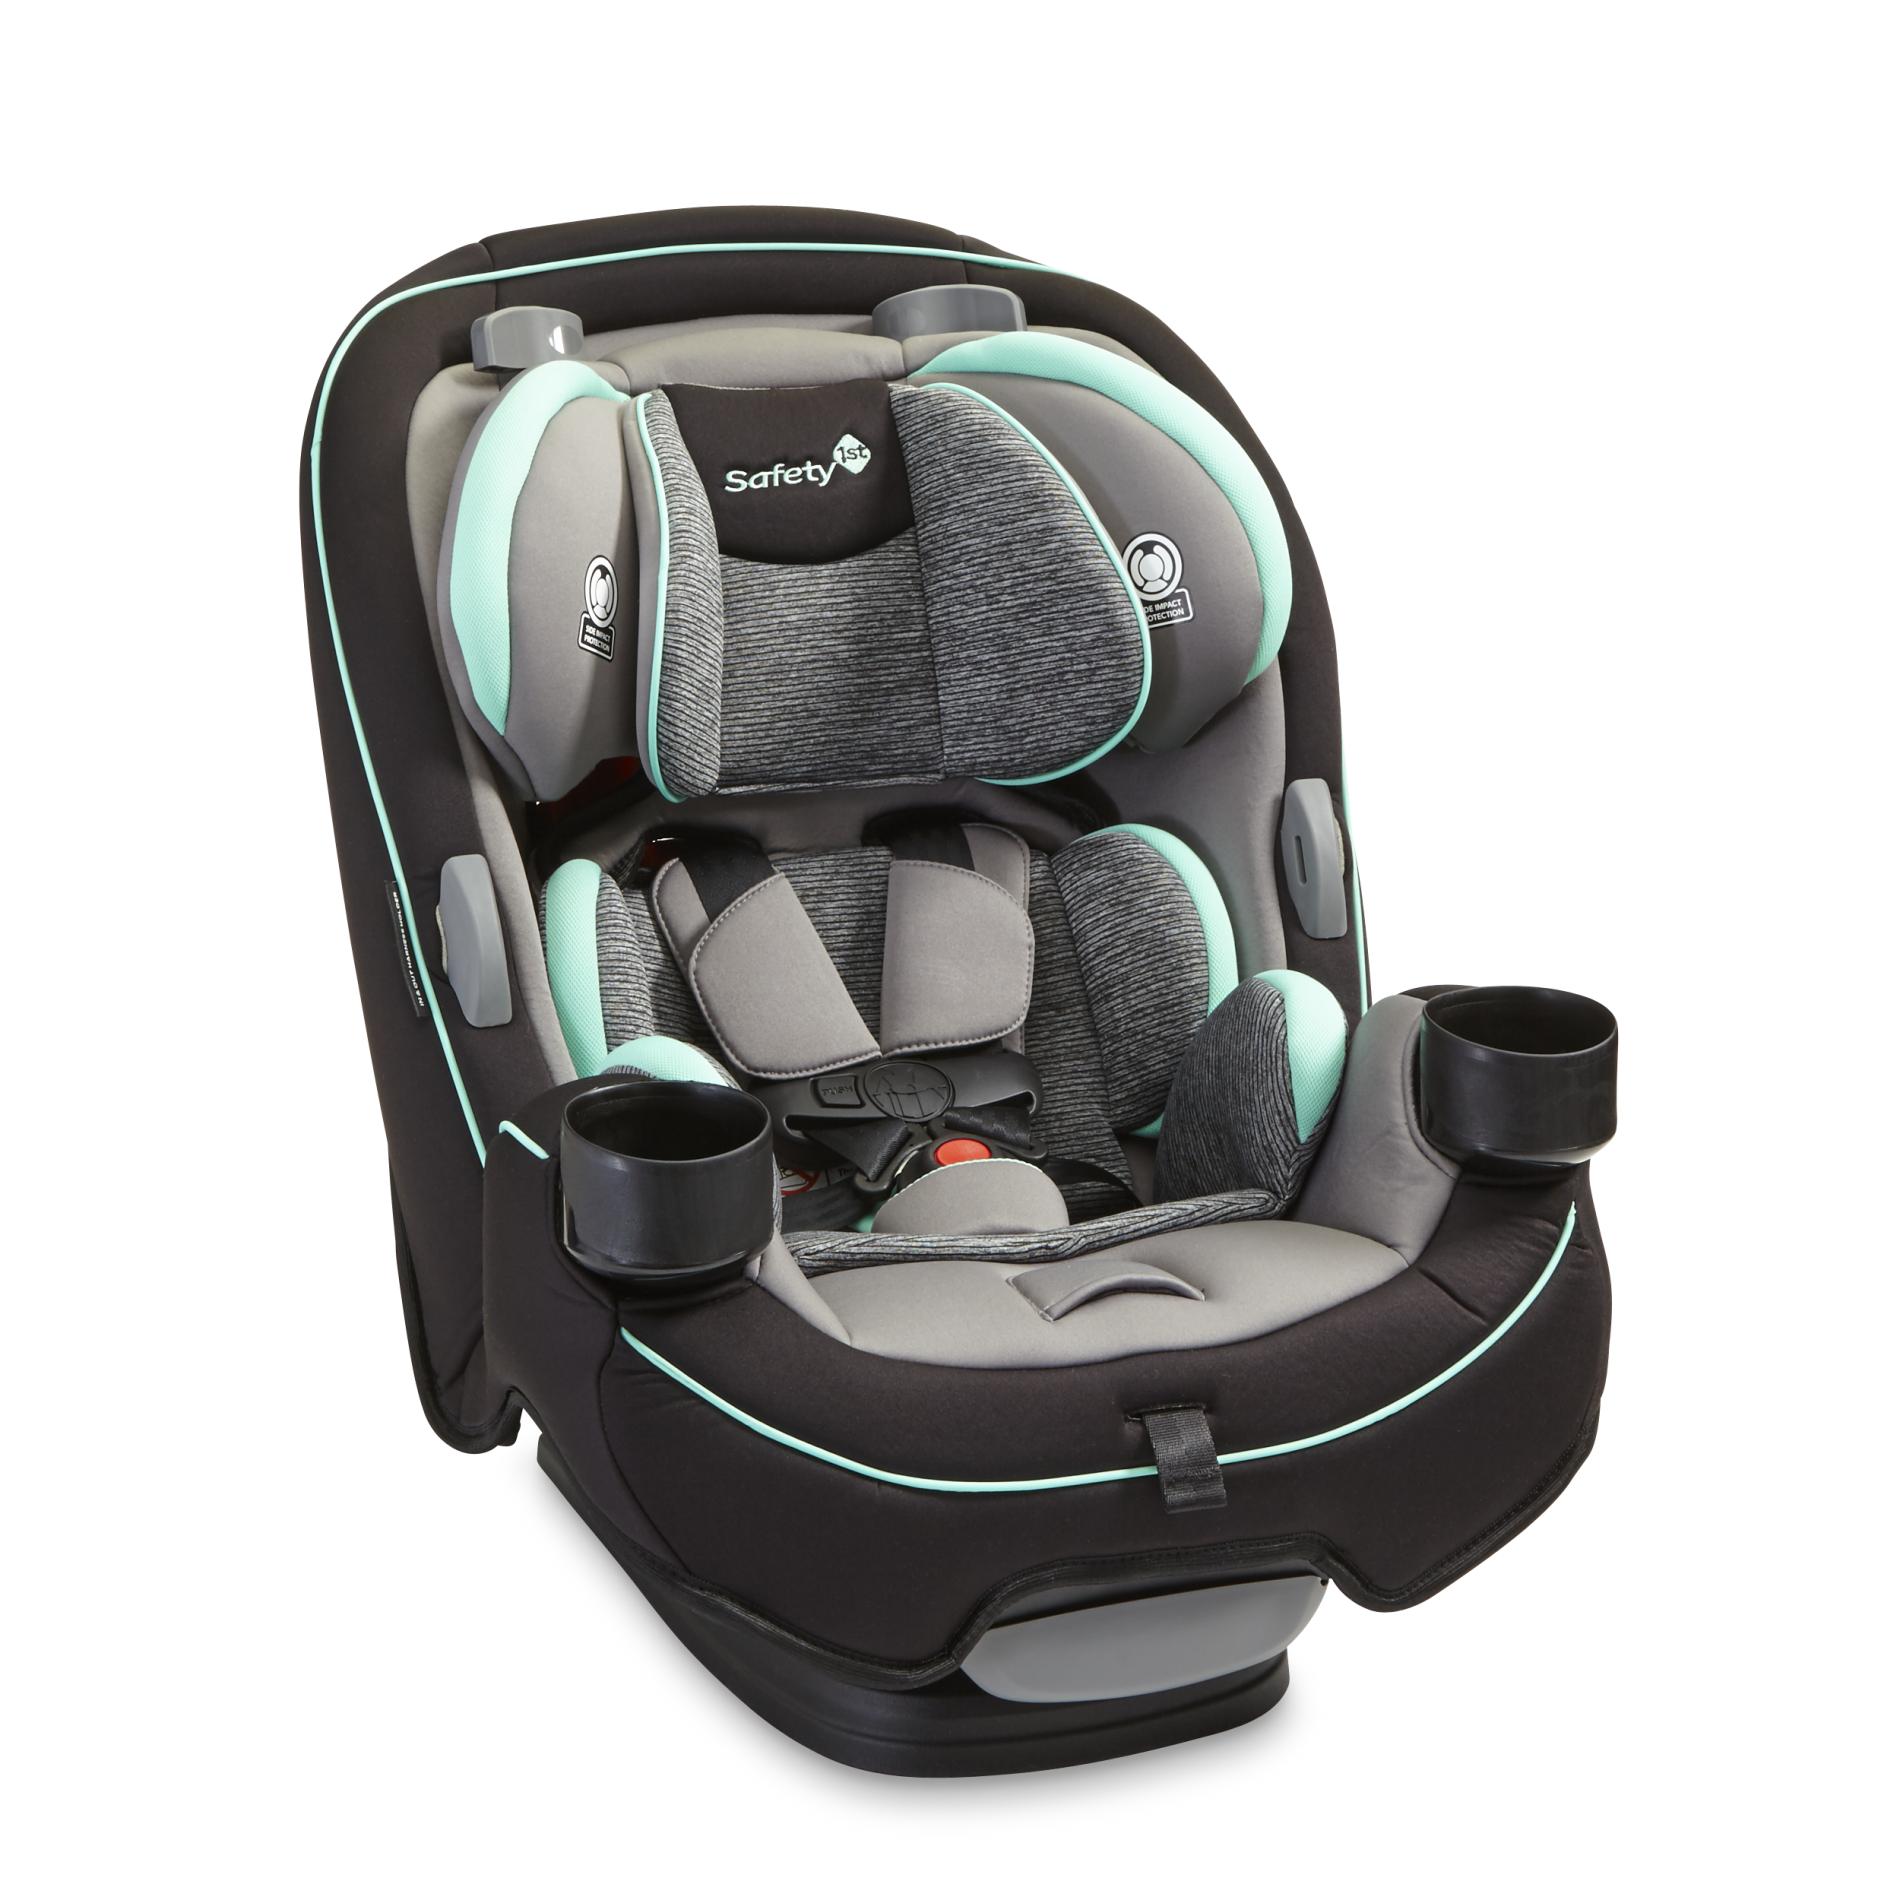 Safety 1st Grow & Go 3-In-1 Convertible Car Seat